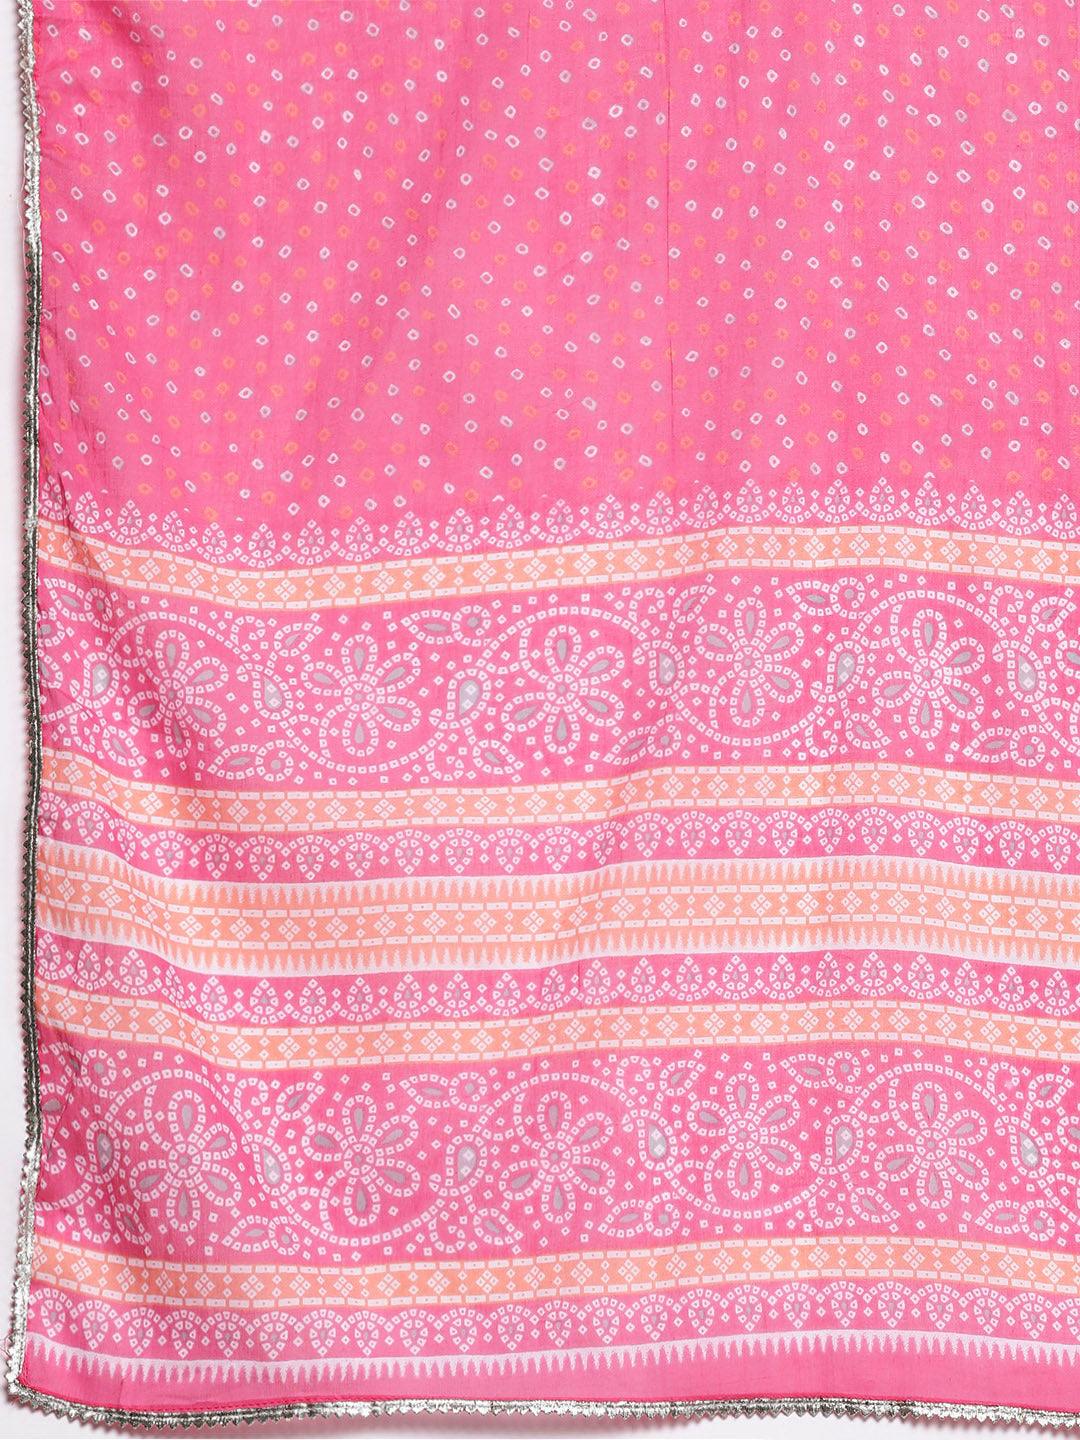 Plus Size Pink Printed Cotton Suit Set With Palazzos - Libas